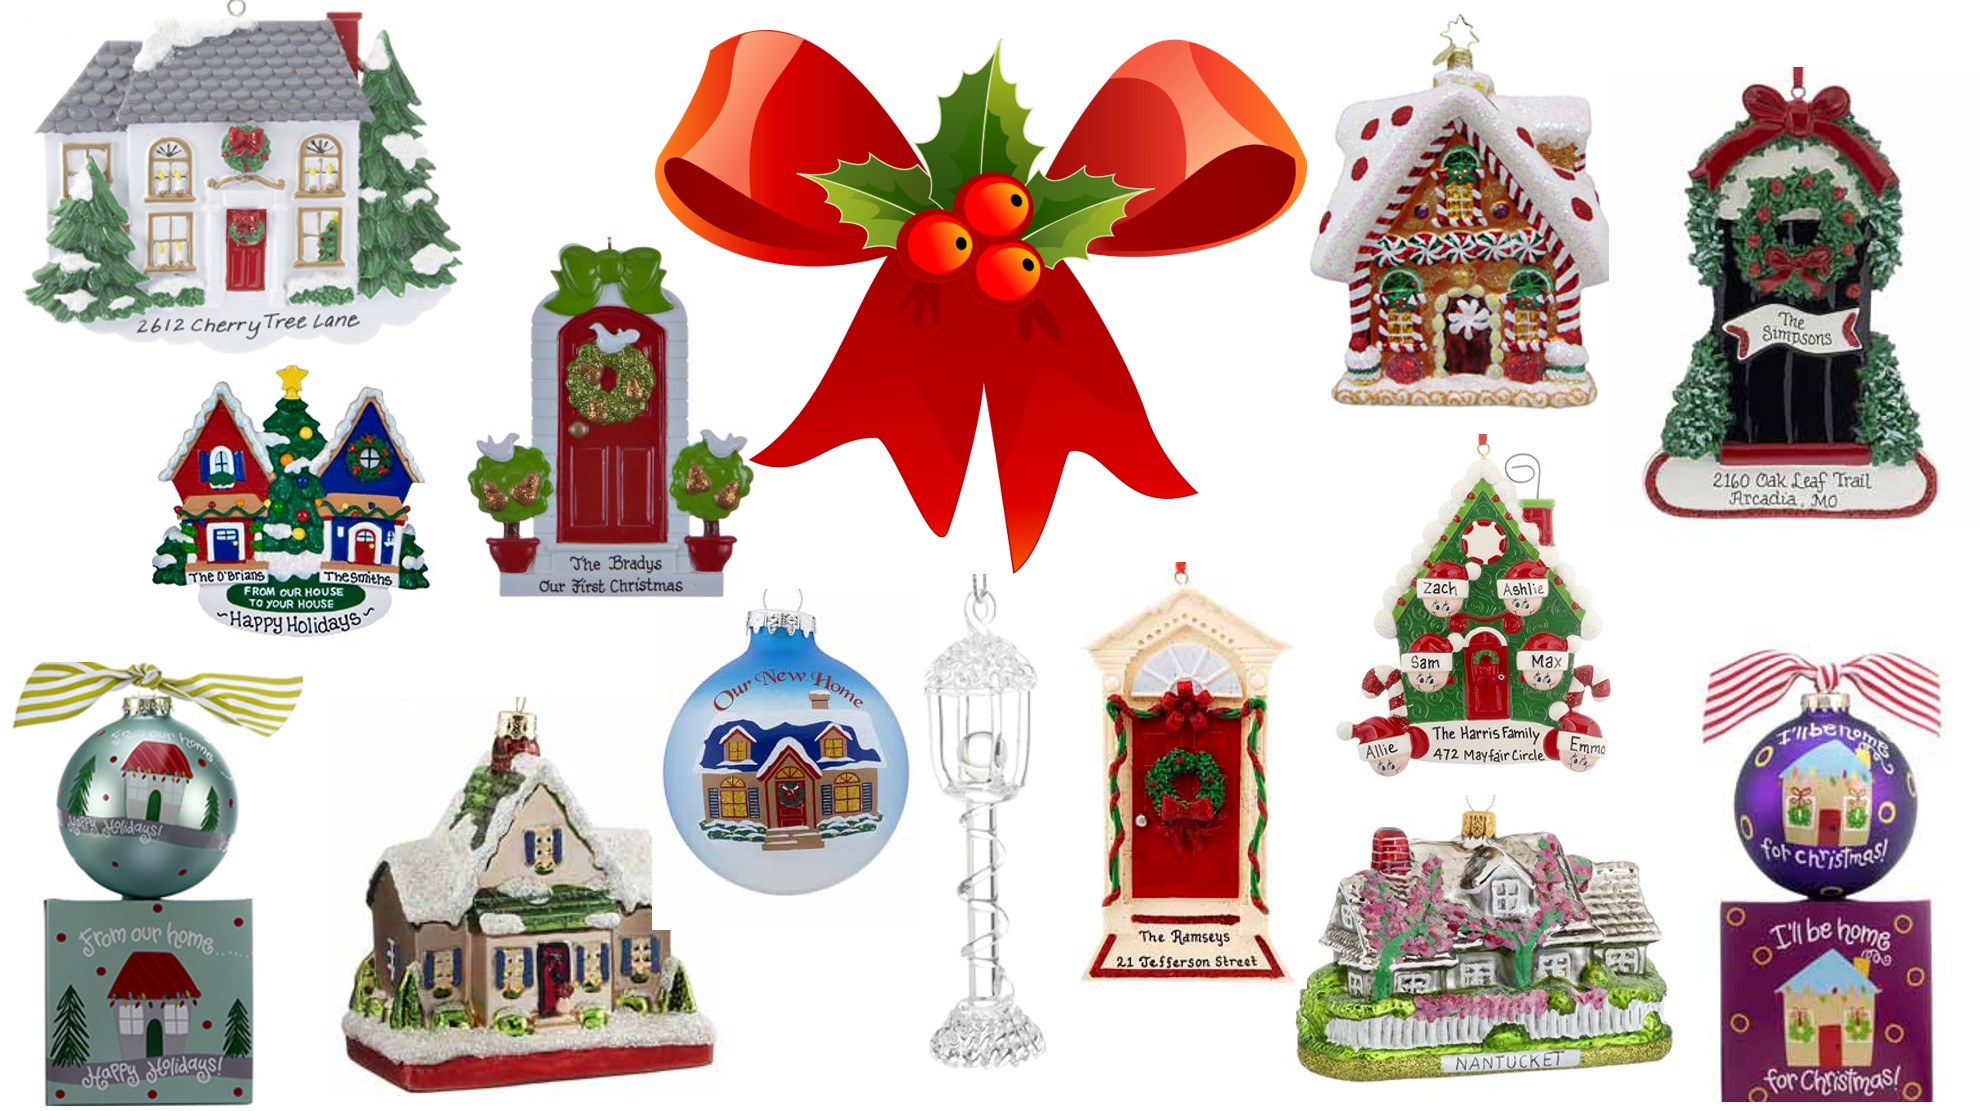 Personalized glass bulbs and snow covered house ornaments. | OrnamentShop.com